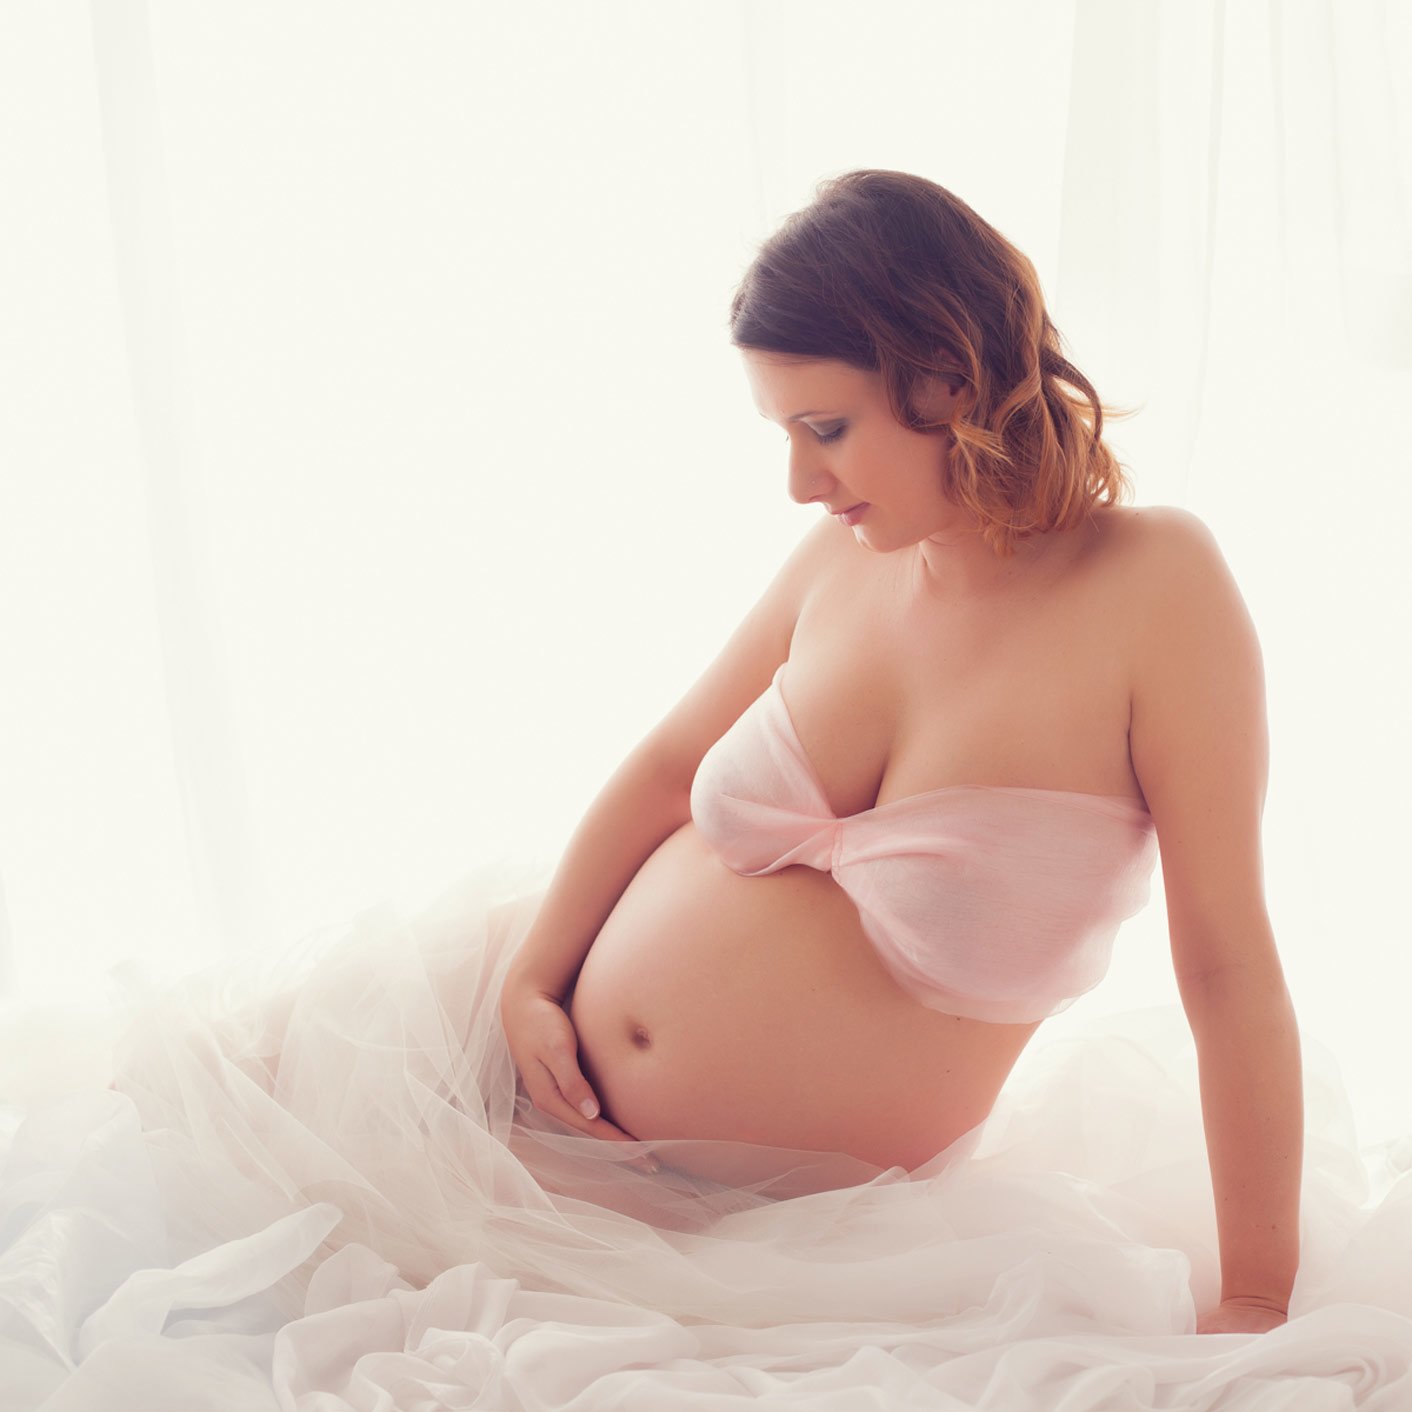 Artistic Pregnancy Photos with flare of Fine Art Nude